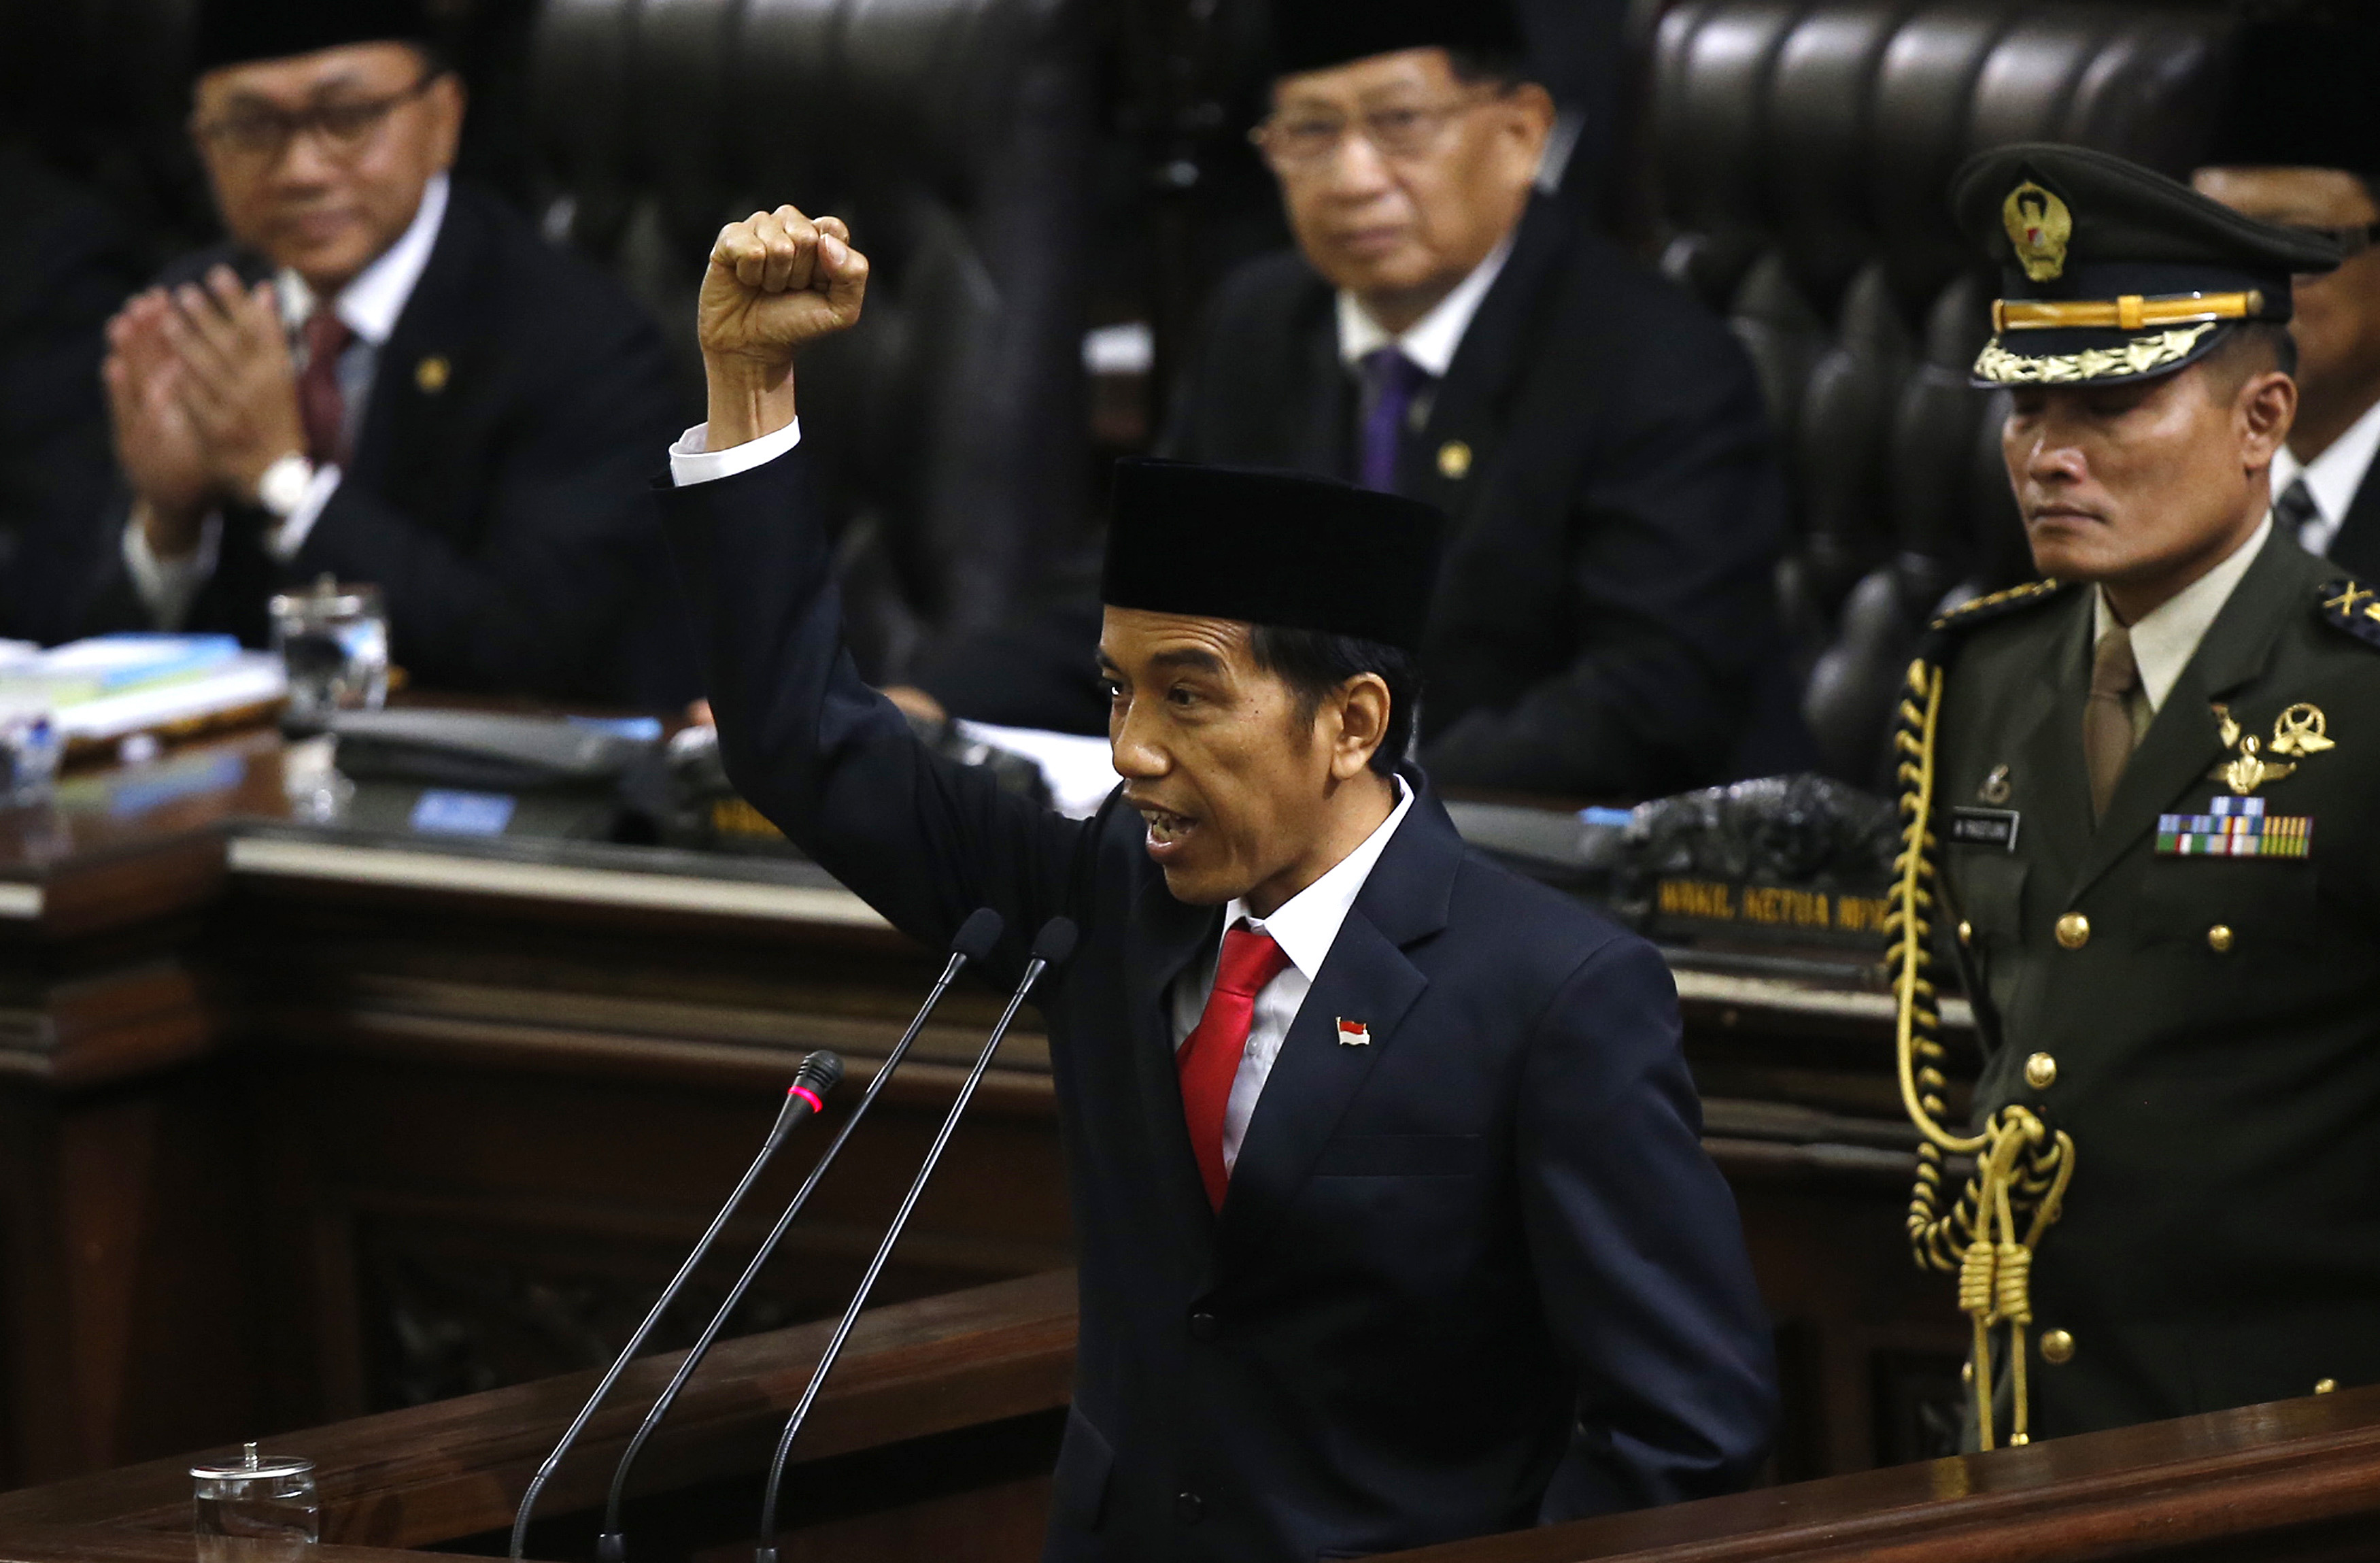 Indonesia's new President Joko Widodo shouts "<i>Merdeka</i>," meaning freedom, at the end of his speech, during his inauguration at the parliament's building in Jakarta on Oct. 20, 2014 (Darren Whiteside—Reuters)